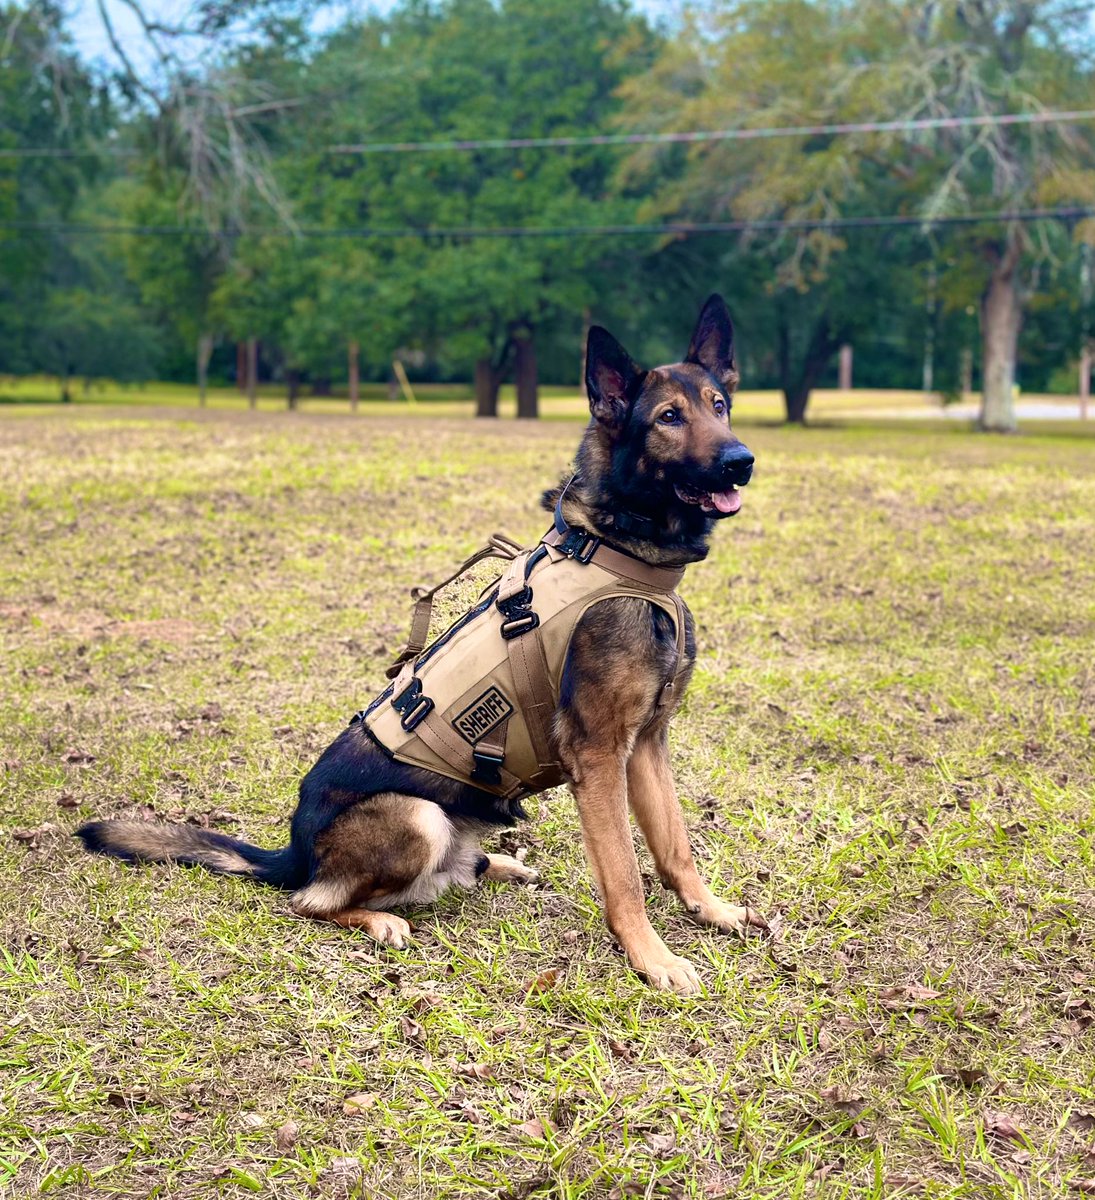 Happy Thursday, everyone! Here’s some K9 Neo love to help start off the day right! 💙💚🤎🖤🩶